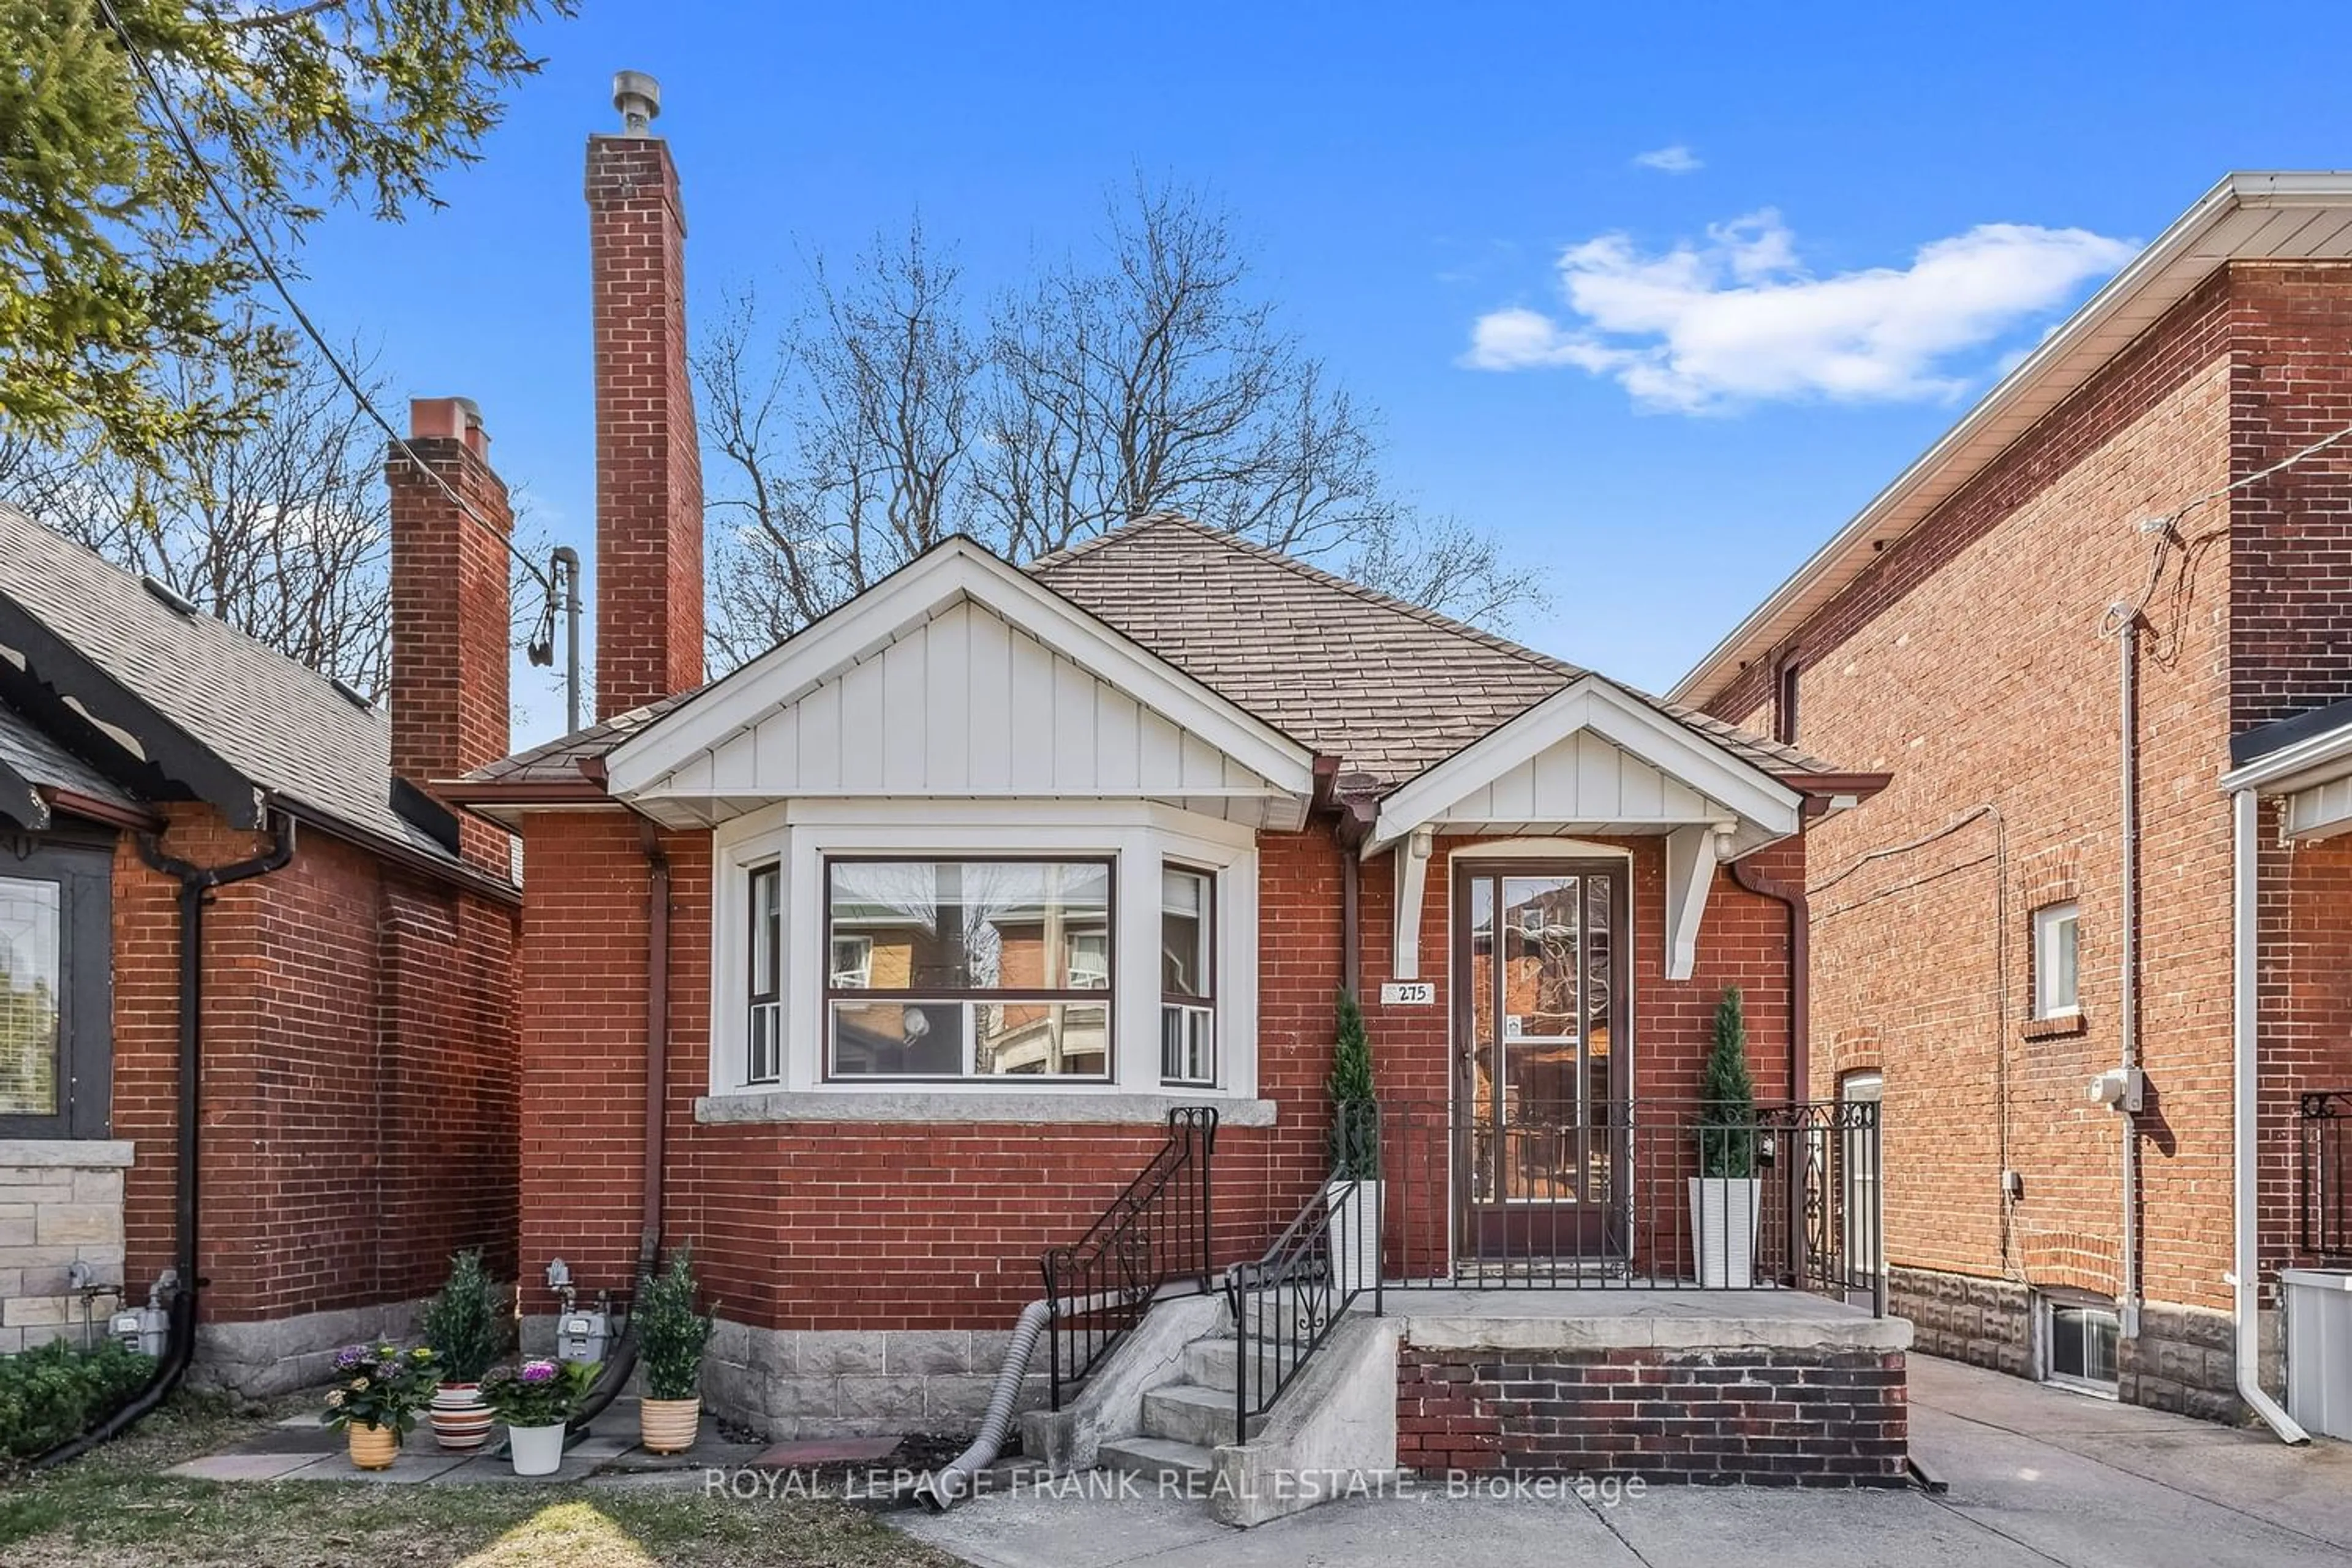 Home with brick exterior material for 275 Mortimer Ave, Toronto Ontario M4J 2C6